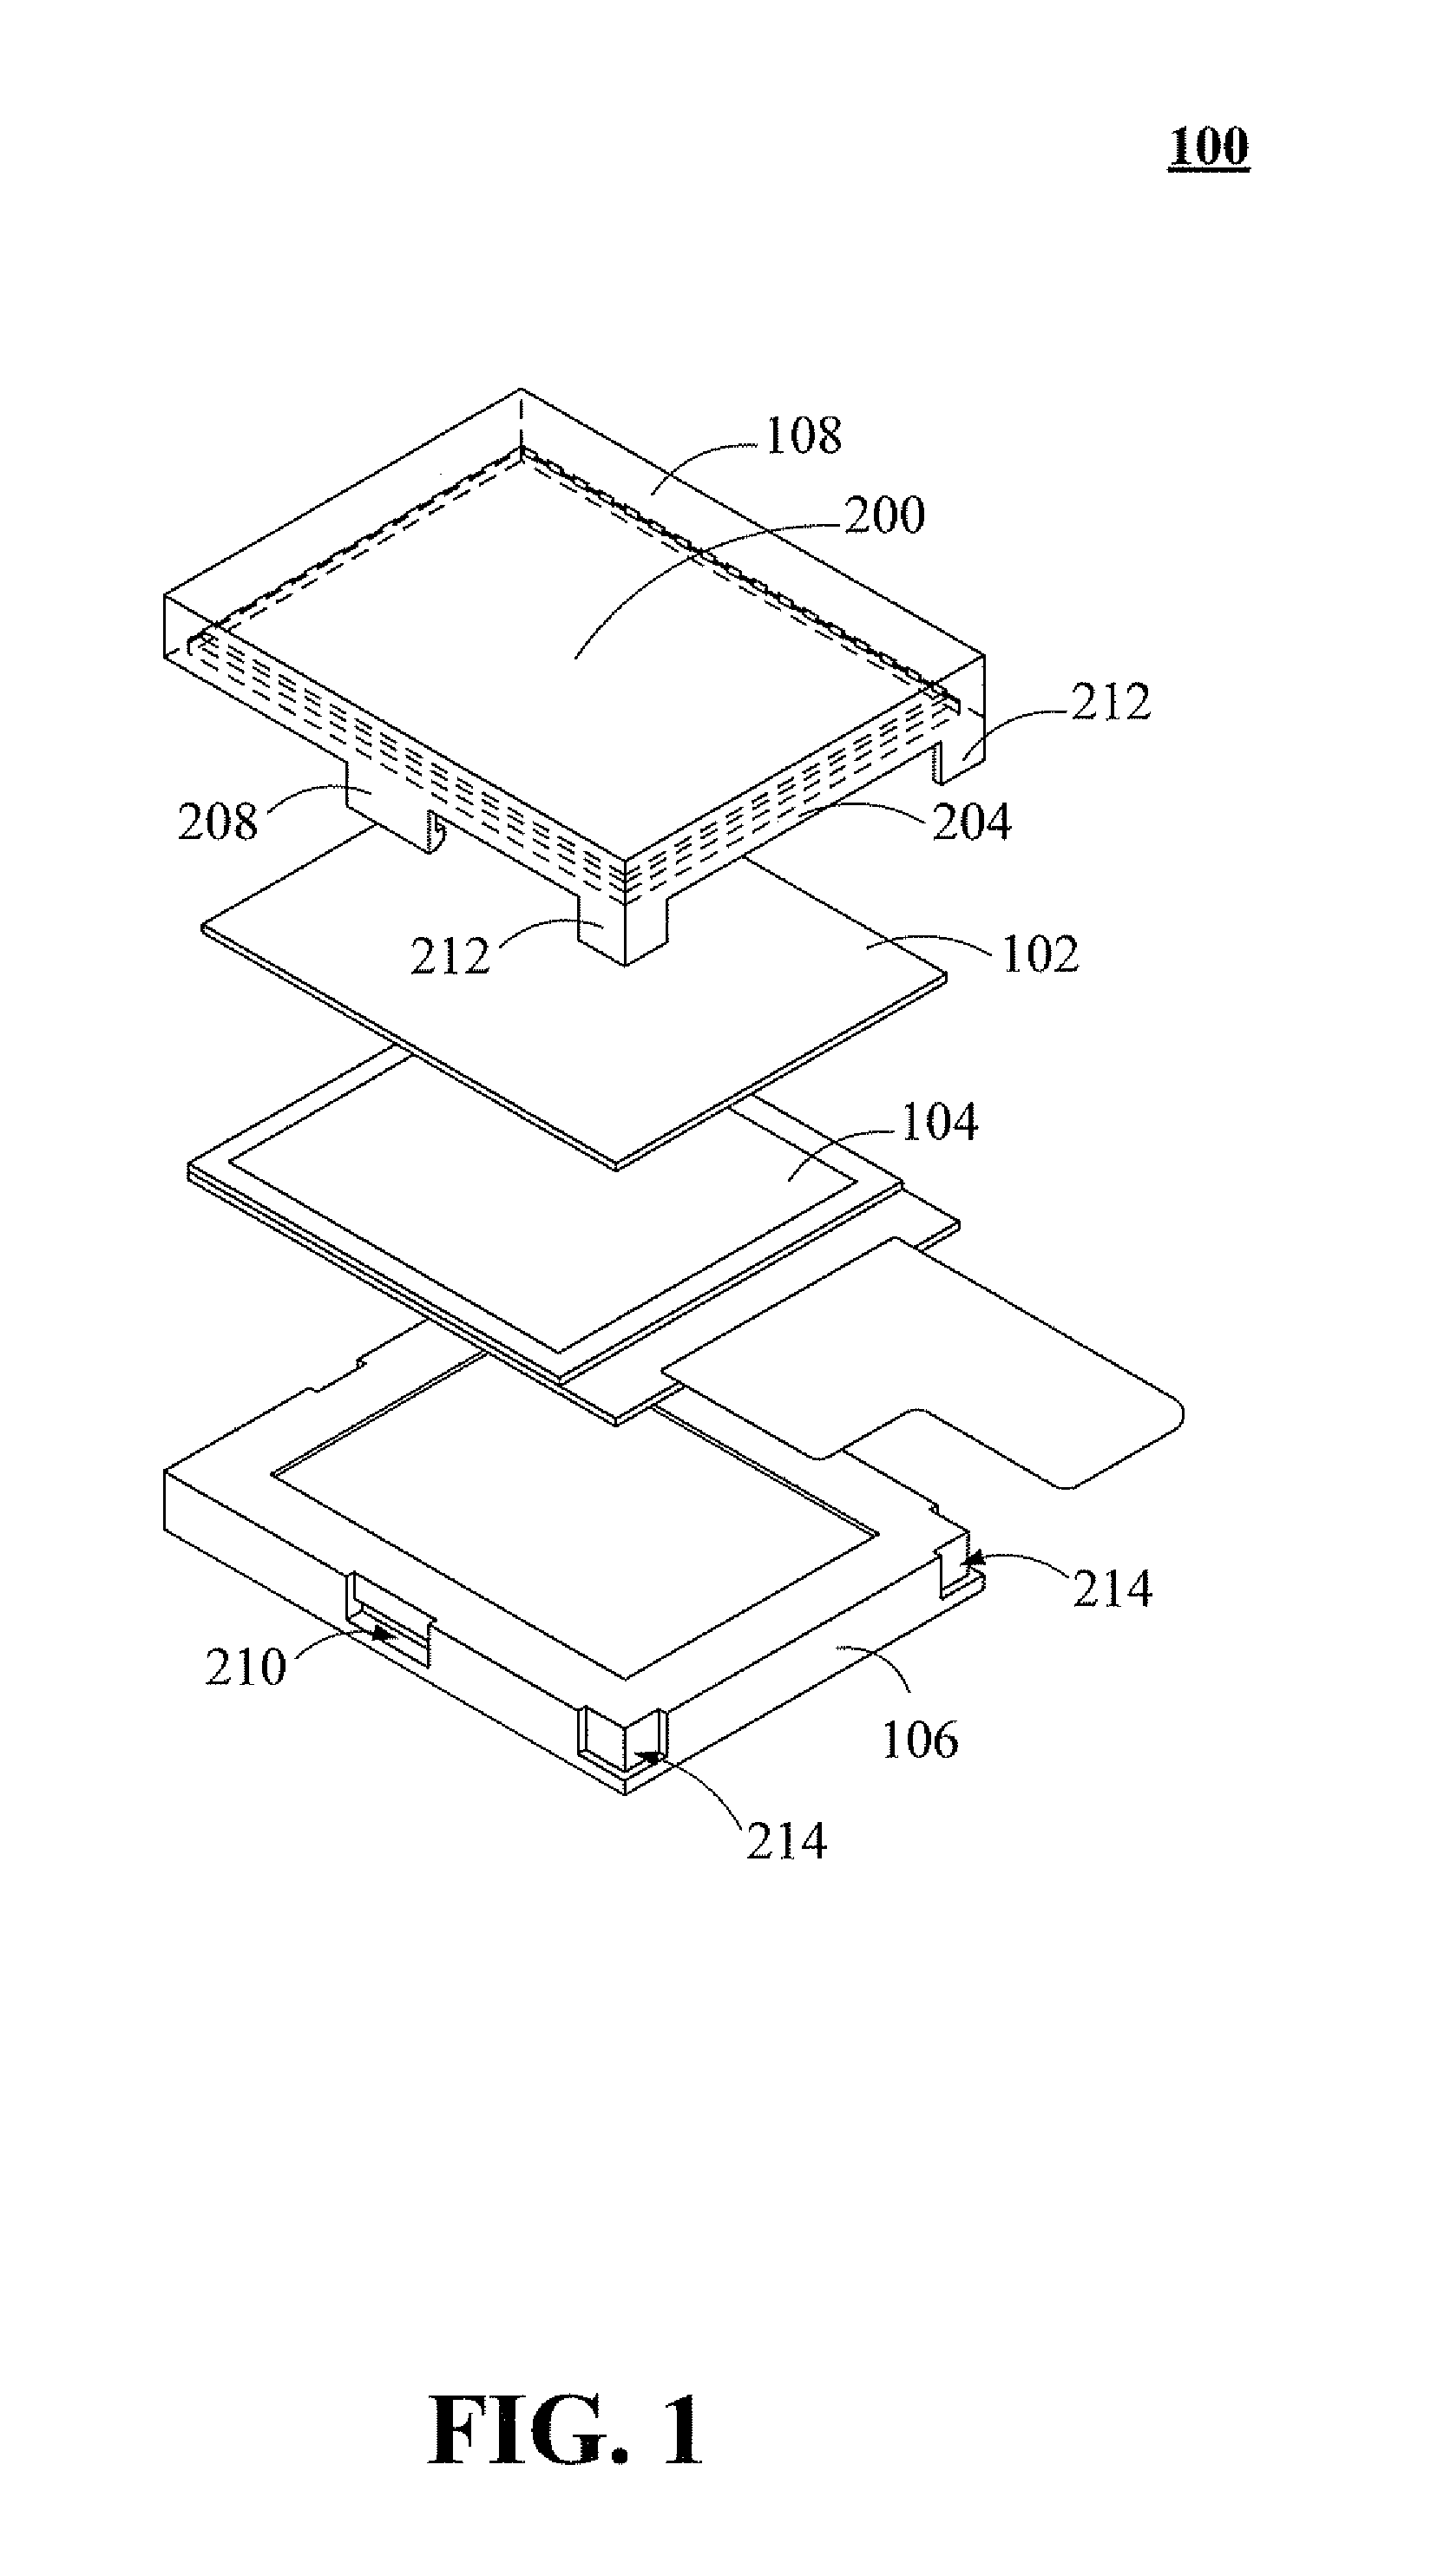 Touch display apparatus having cover lens structure